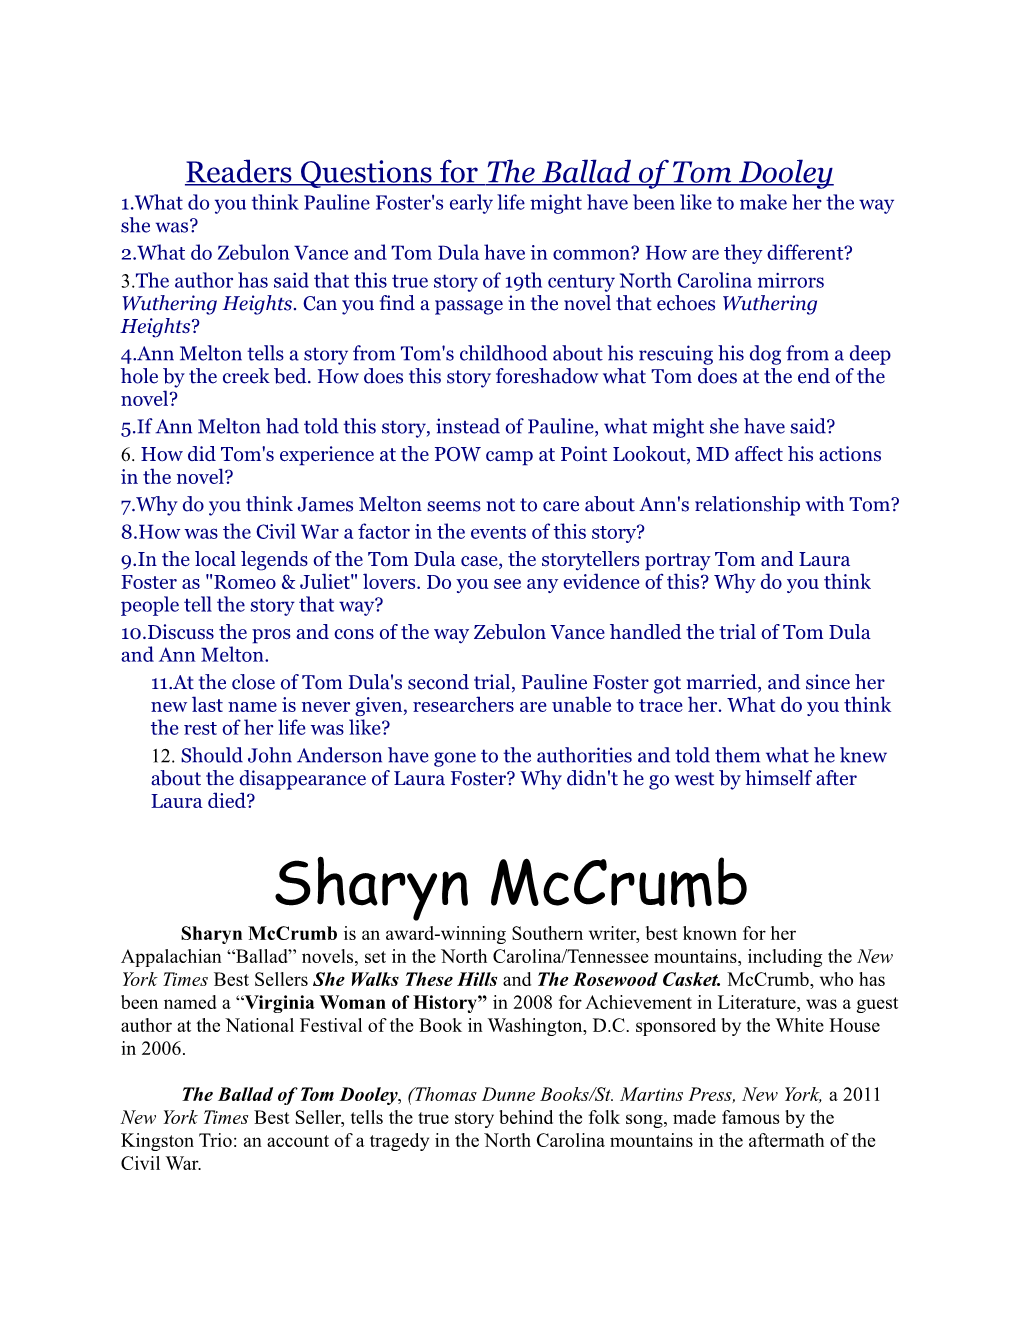 Readers Questions for the Ballad of Tom Dooley